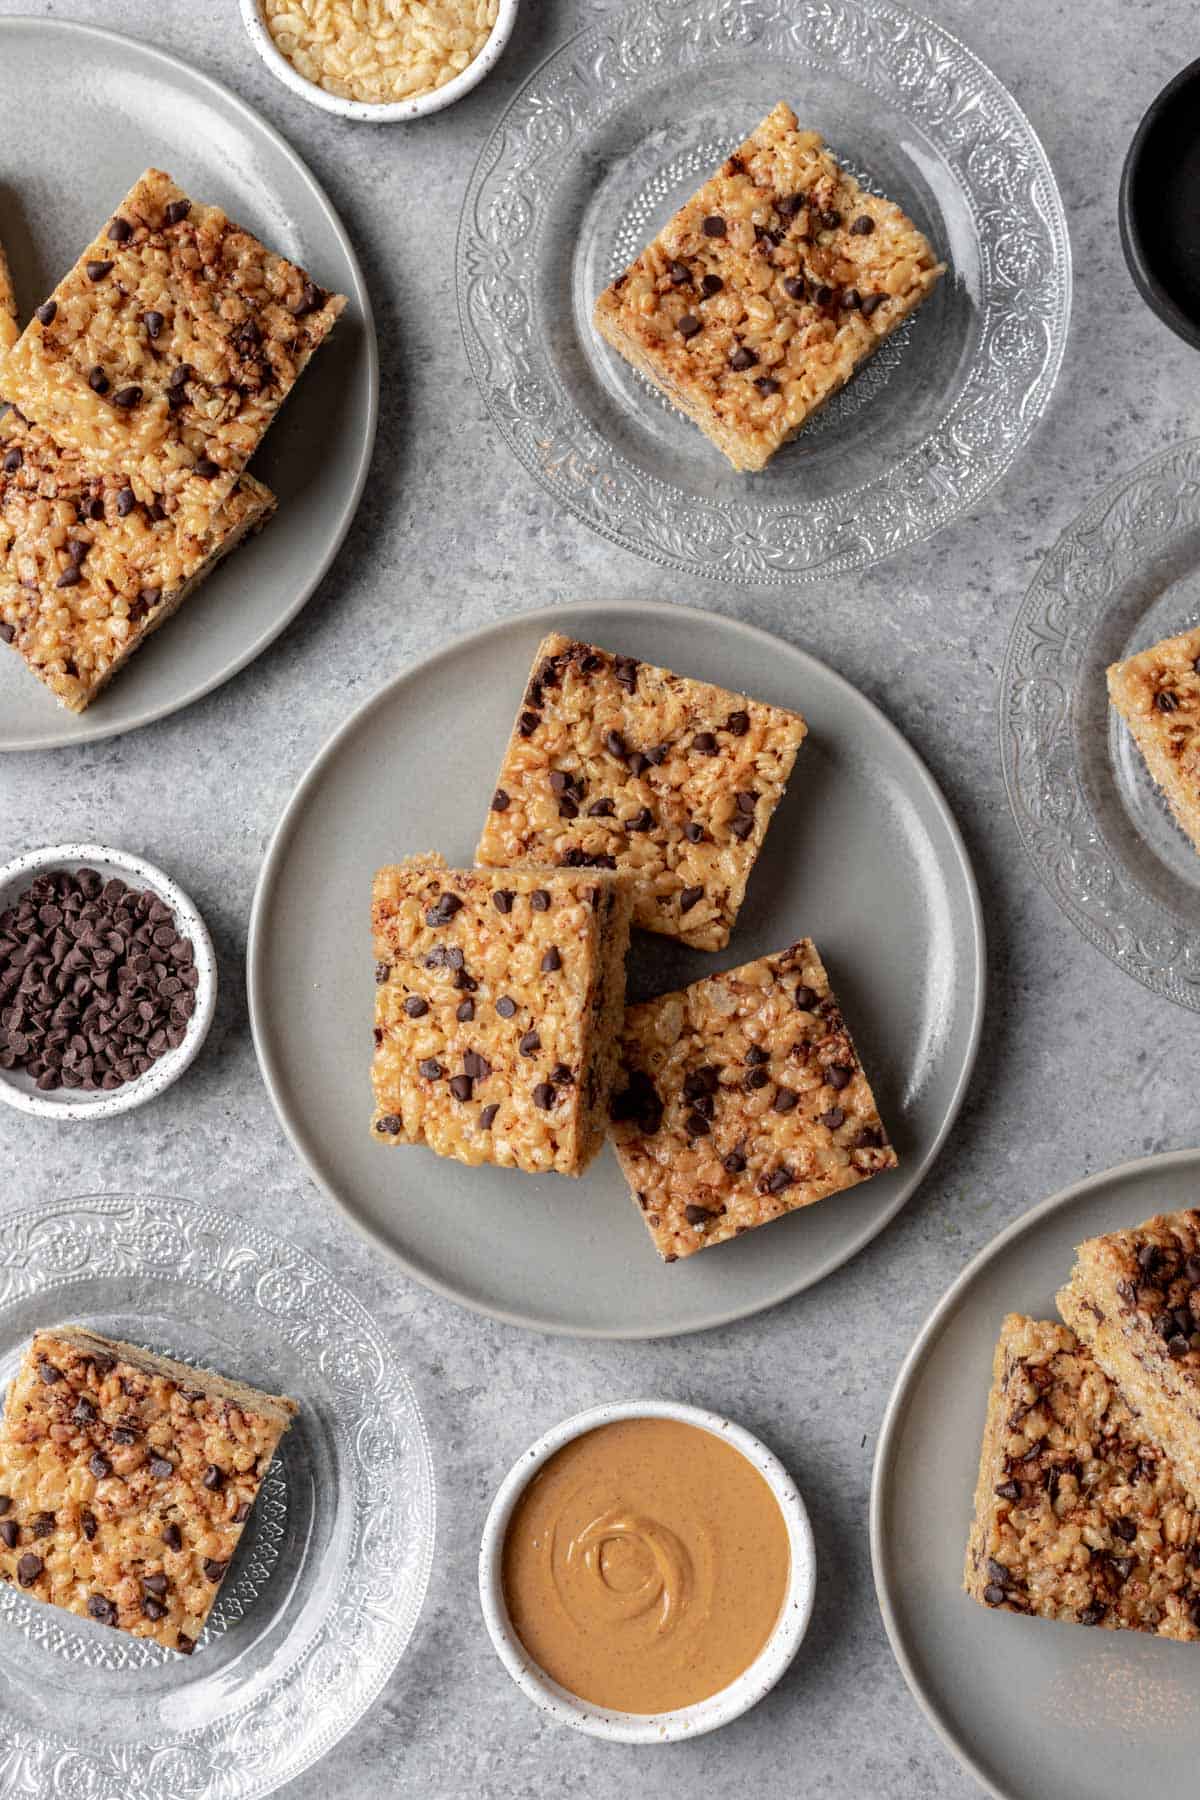 Peanut butter chocolate chip rice krispie treats on gray plates with a side of extra peanut butter and chocolate chips.